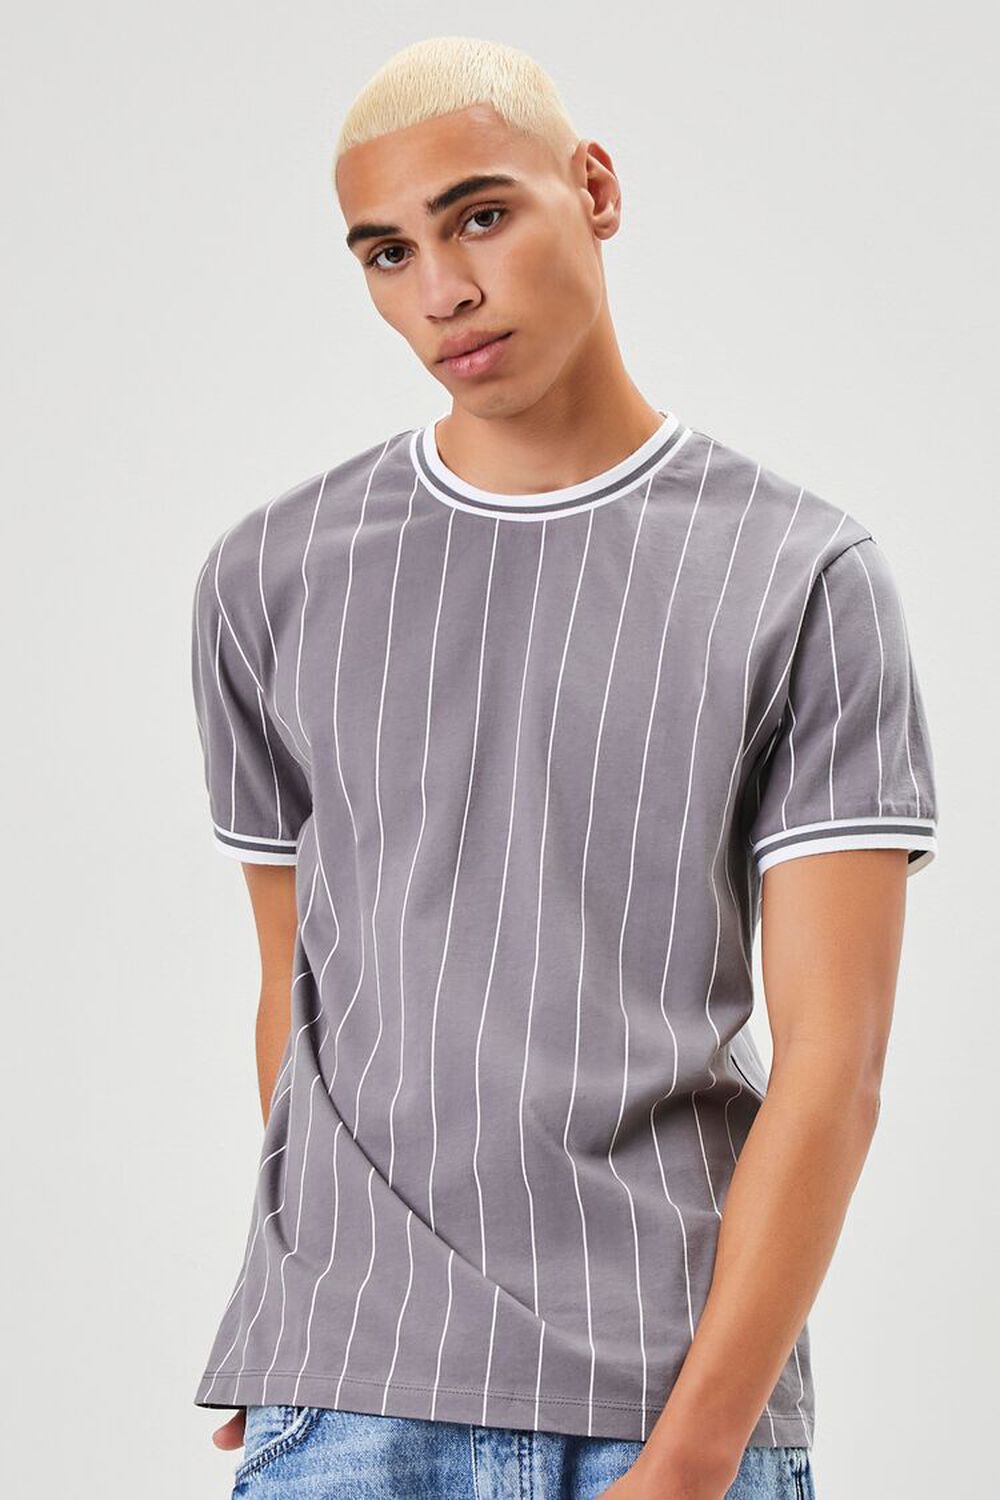 CHARCOAL/WHITE Pinstriped Ringer Tee, image 1